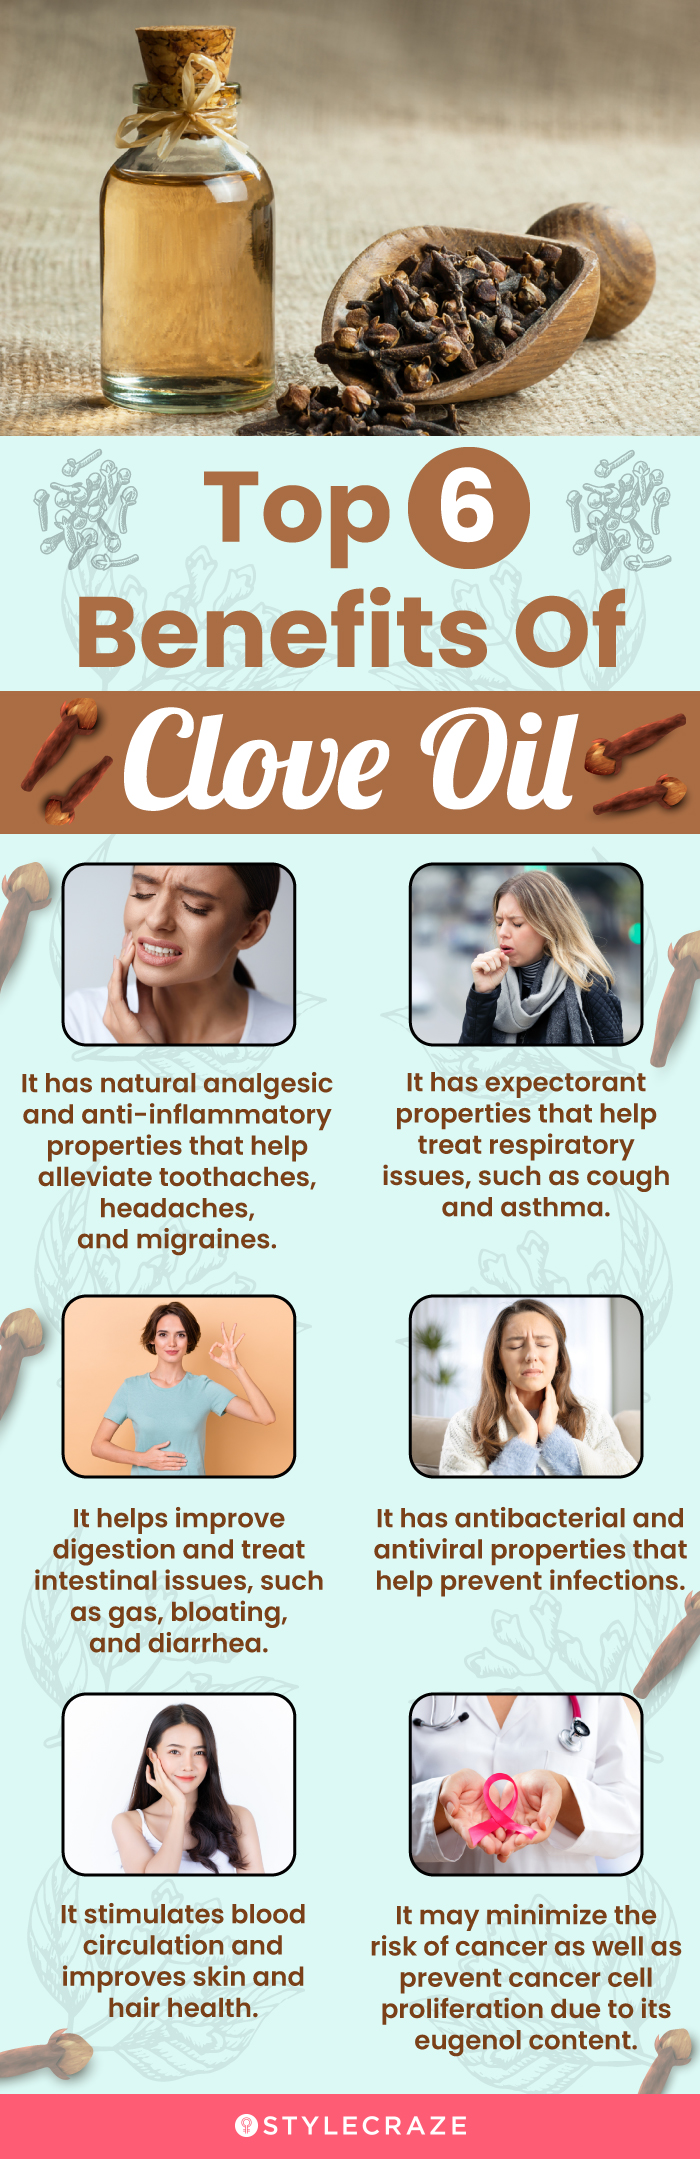 top 6 benefits of clove oil (infographic)